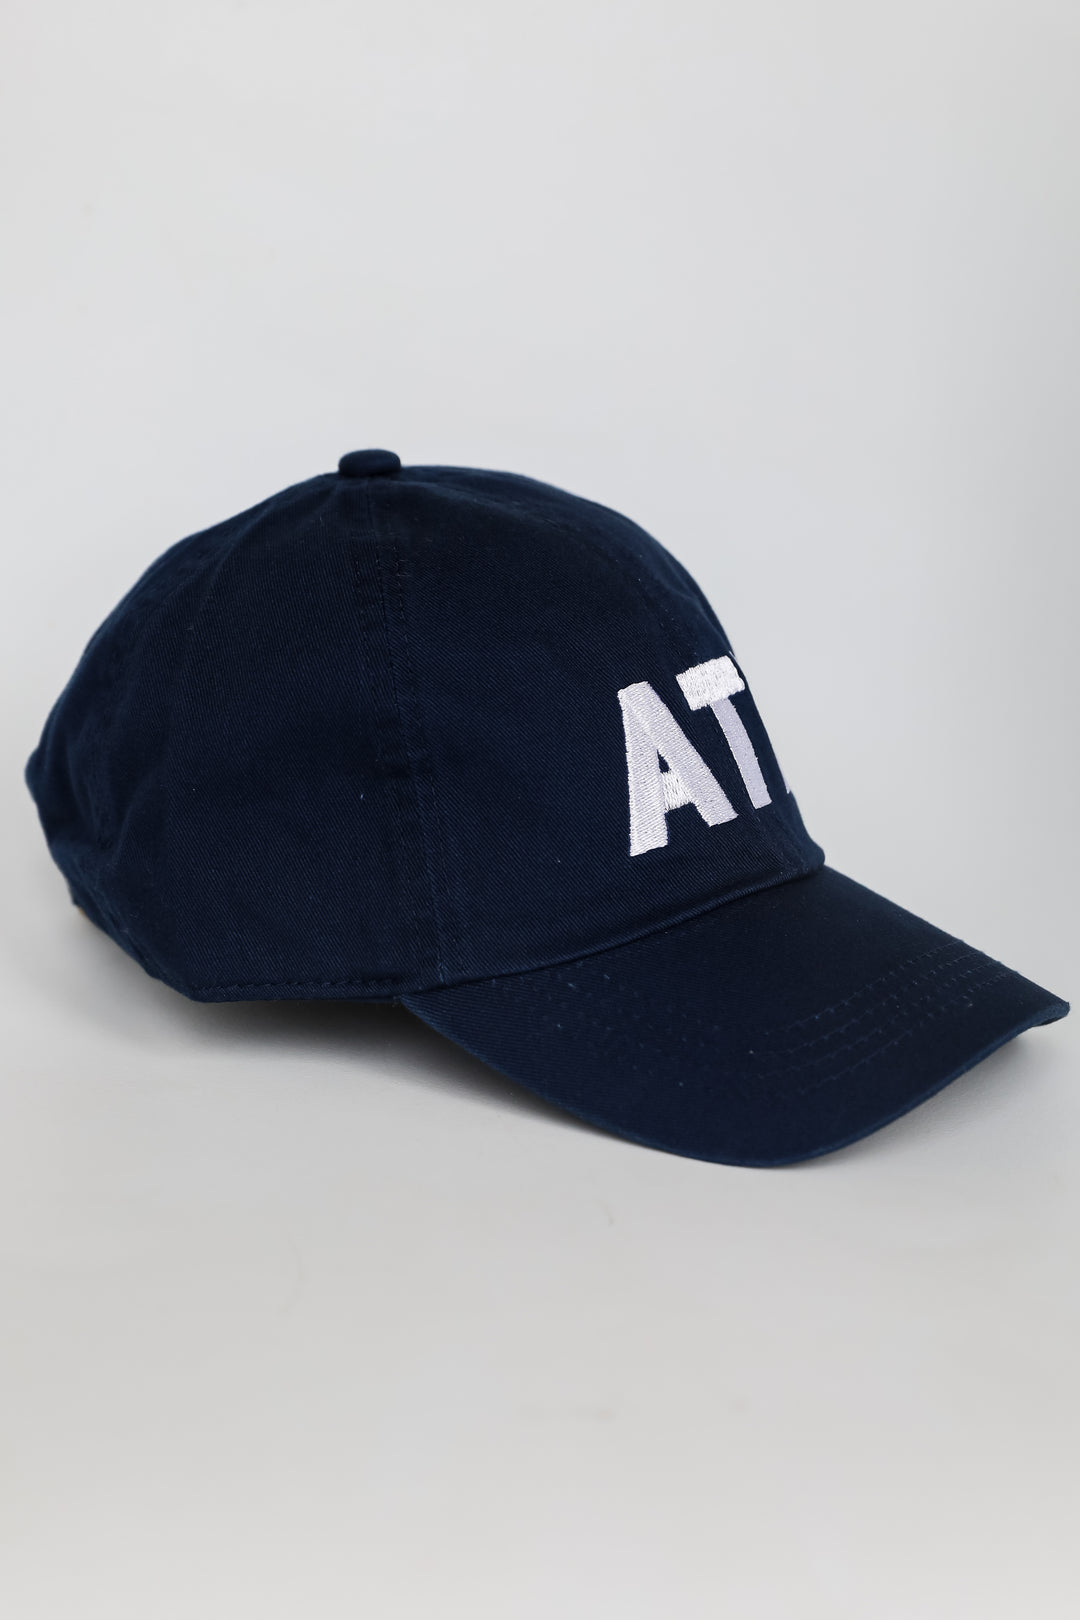 ATL Embroidered Hat